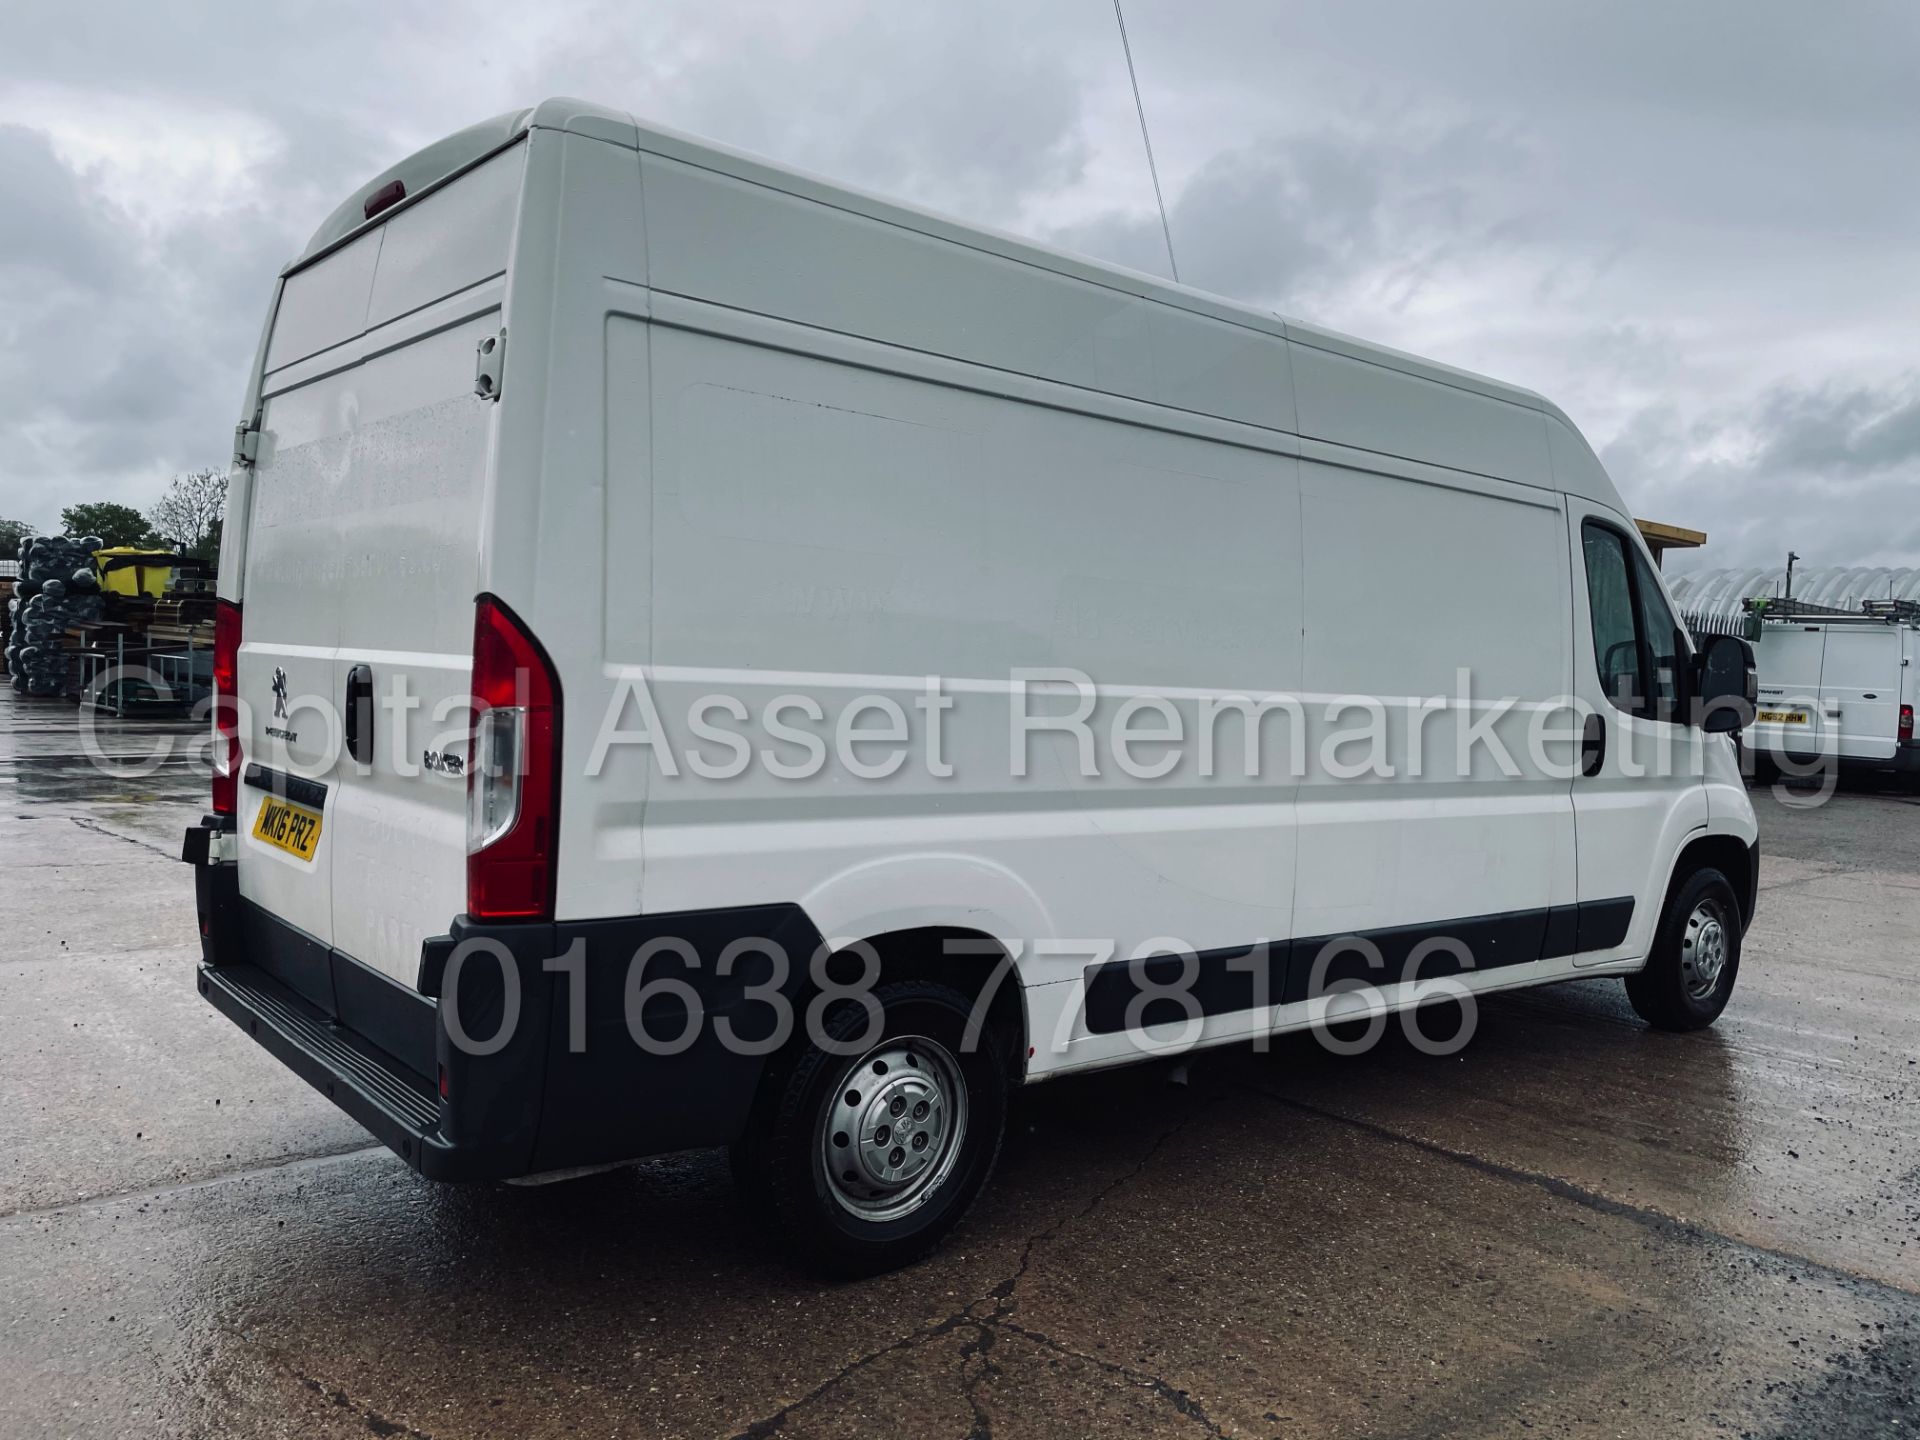 PEUGEOT BOXER 335 *PROFESSIONAL* LWB HI-ROOF (2016) '2.2 HDI - 130 BHP - 6 SPEED' *A/C* (1 OWNER) - Image 13 of 41